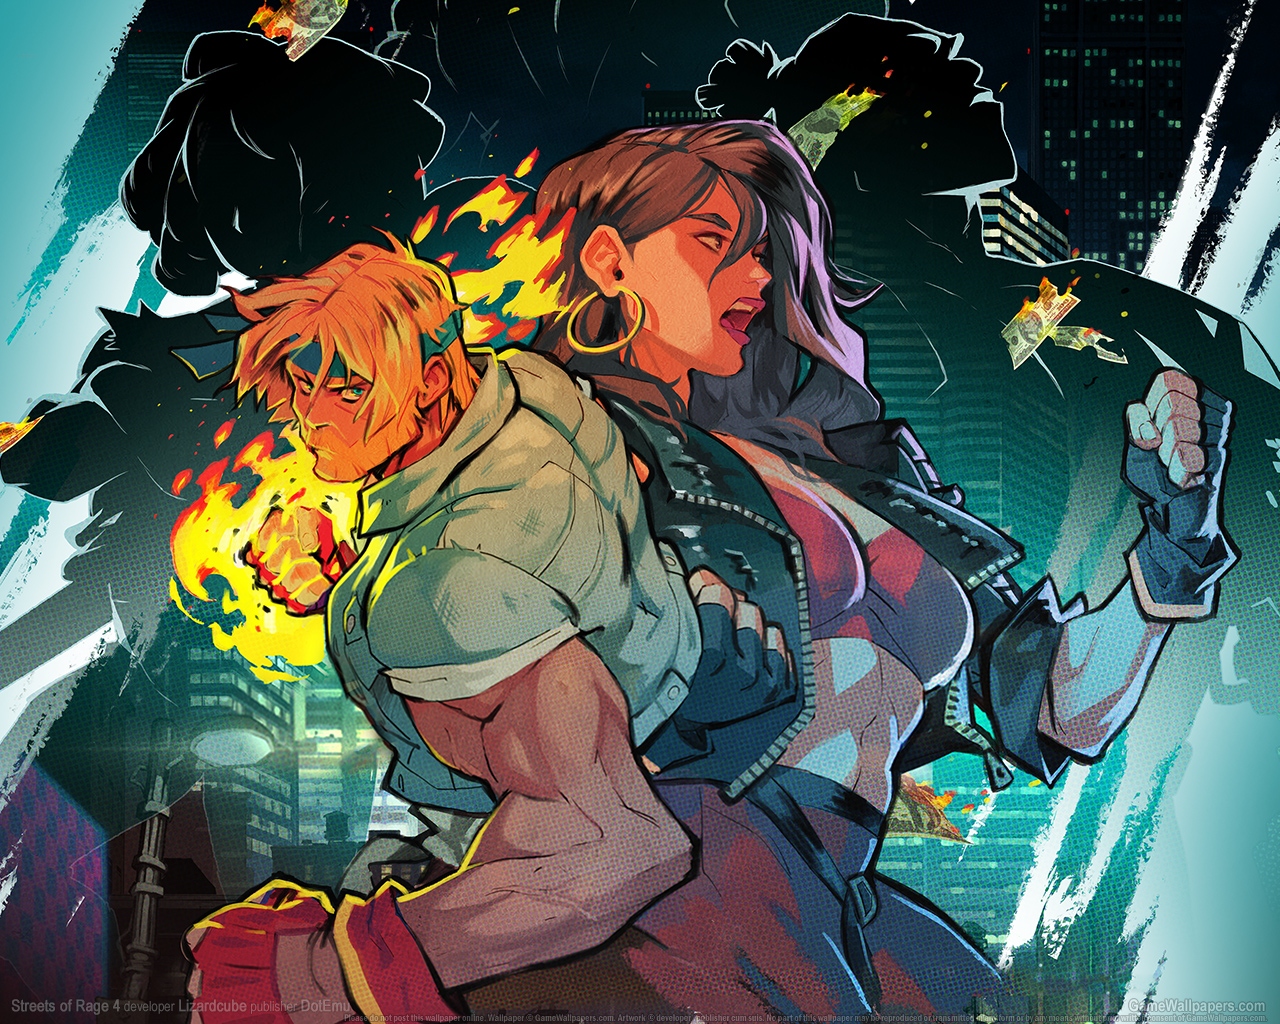 Streets of Rage 4 1280 wallpaper or background 01